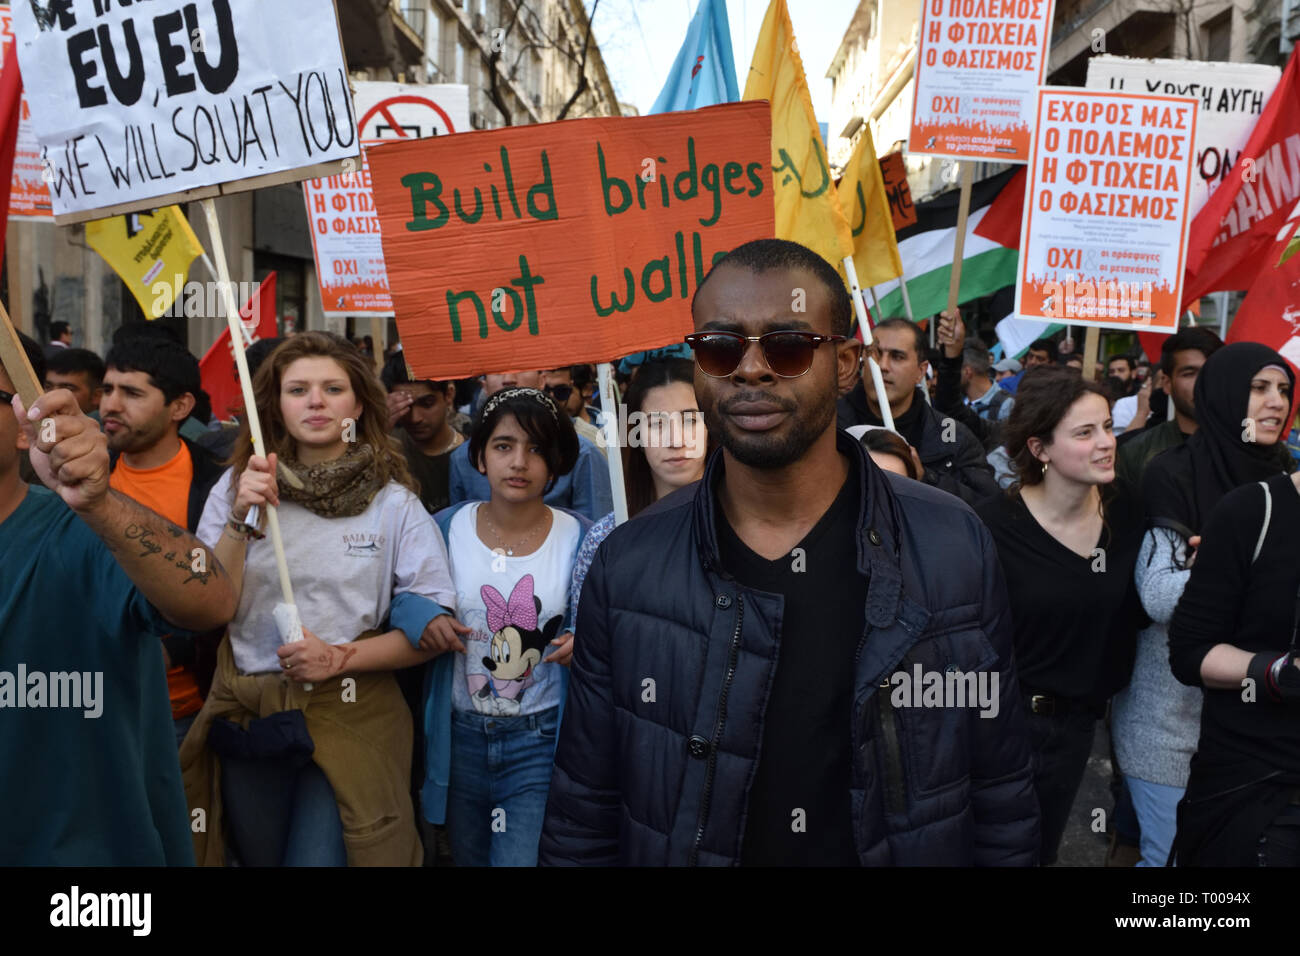 Athens, Greece. 16th Mar 2019. Migrants and supporting activists march chanting slogans during a demonstration to mark the UN International Day for the Elimination of Racial Discrimination in Athens, Greece. Credit: Nicolas Koutsokostas/Alamy Live News. Stock Photo